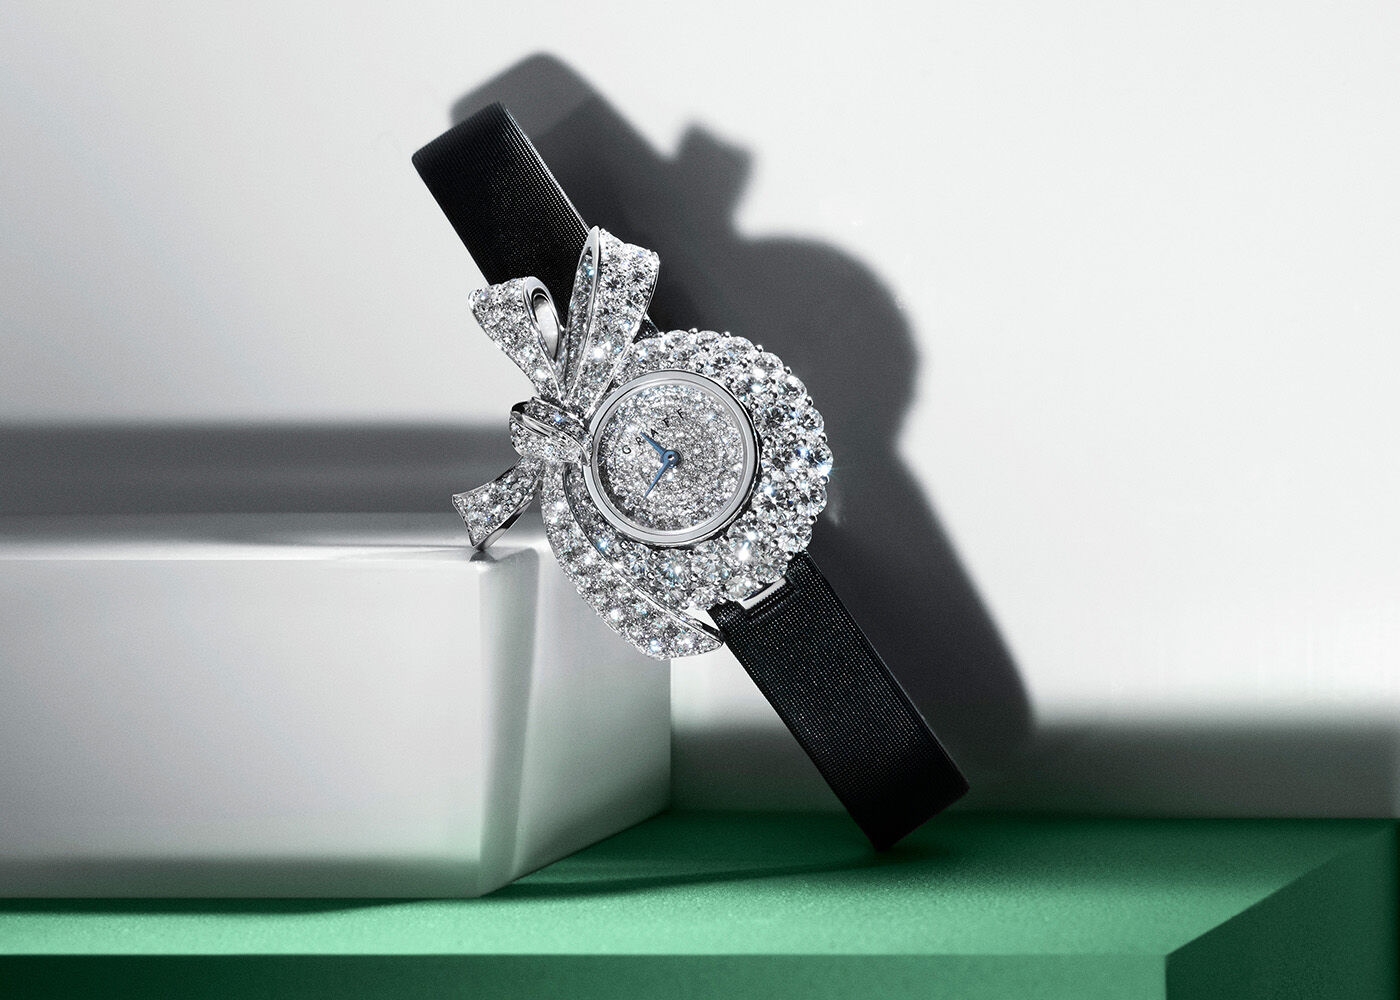 Tilda's Bow diamond watch with packaging